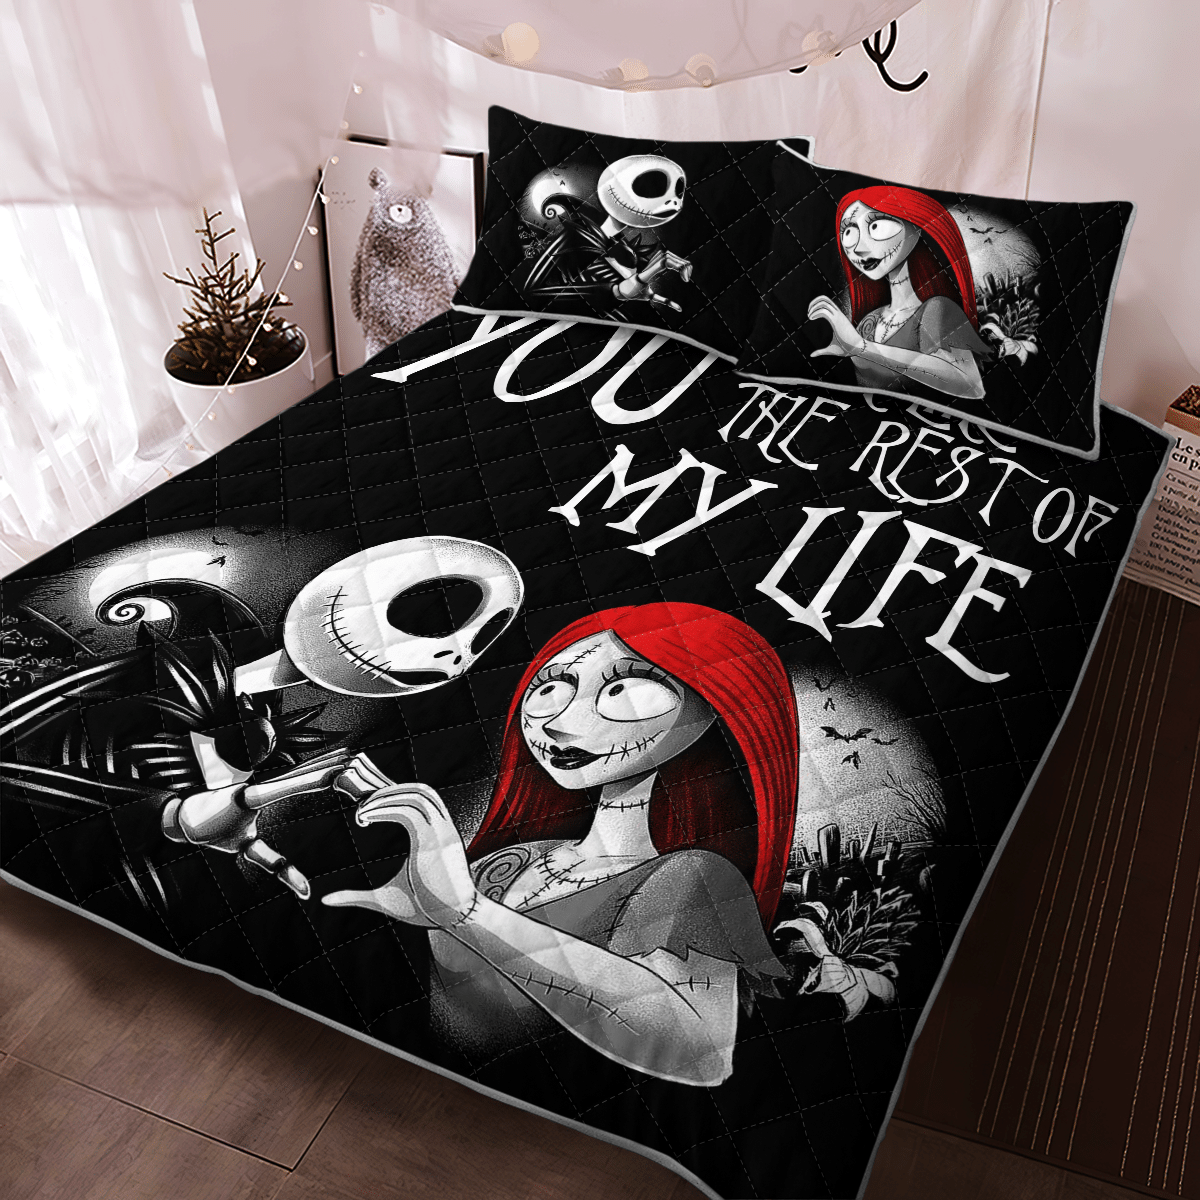 You Look Like The Rest Of My Life Quilt - Bedding Set